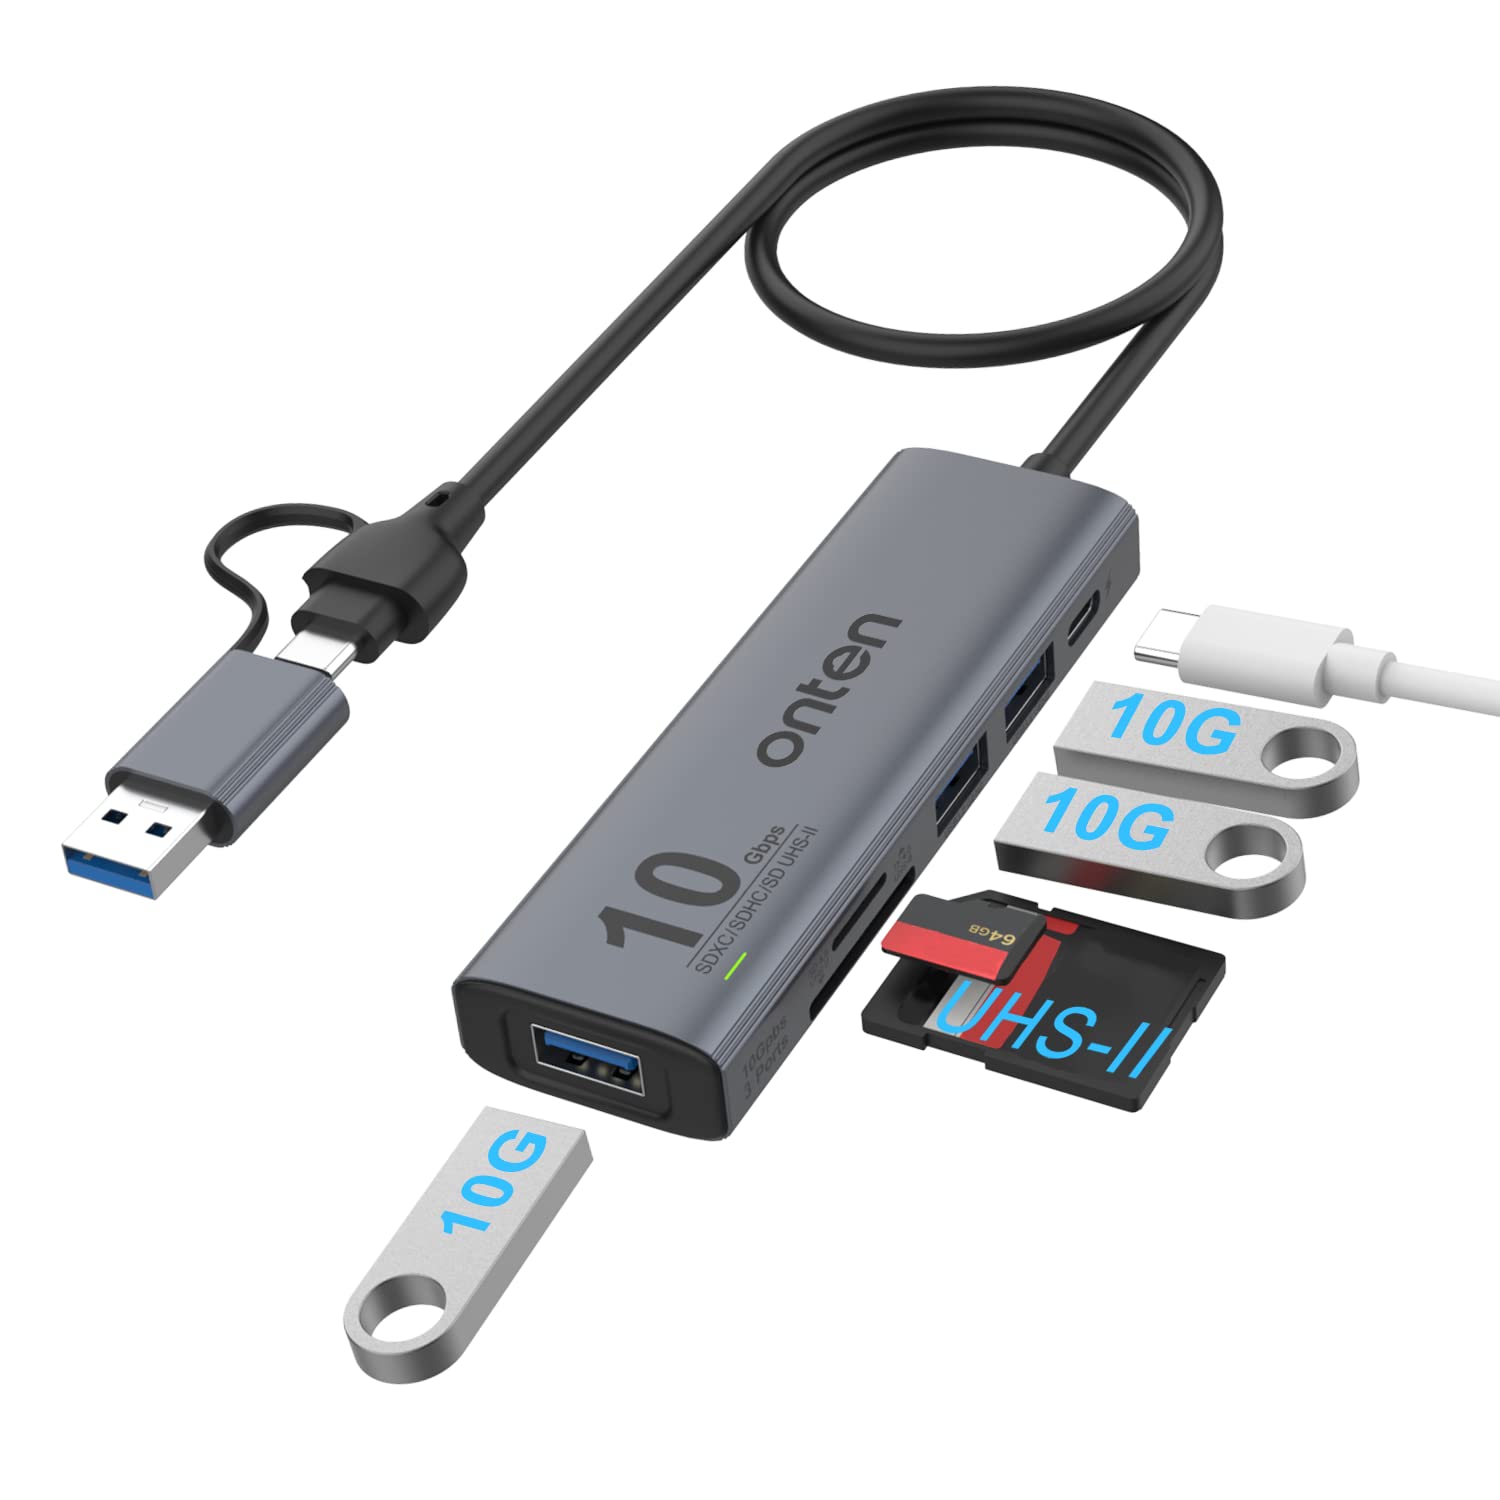 Onten Dual-Slot UHS-II SD4.0 Card Reader.10Gbps USB C to USB Hub AdapterUSB Hub with 3USB 3.2 GEN 210Gbps Port and UHS-II